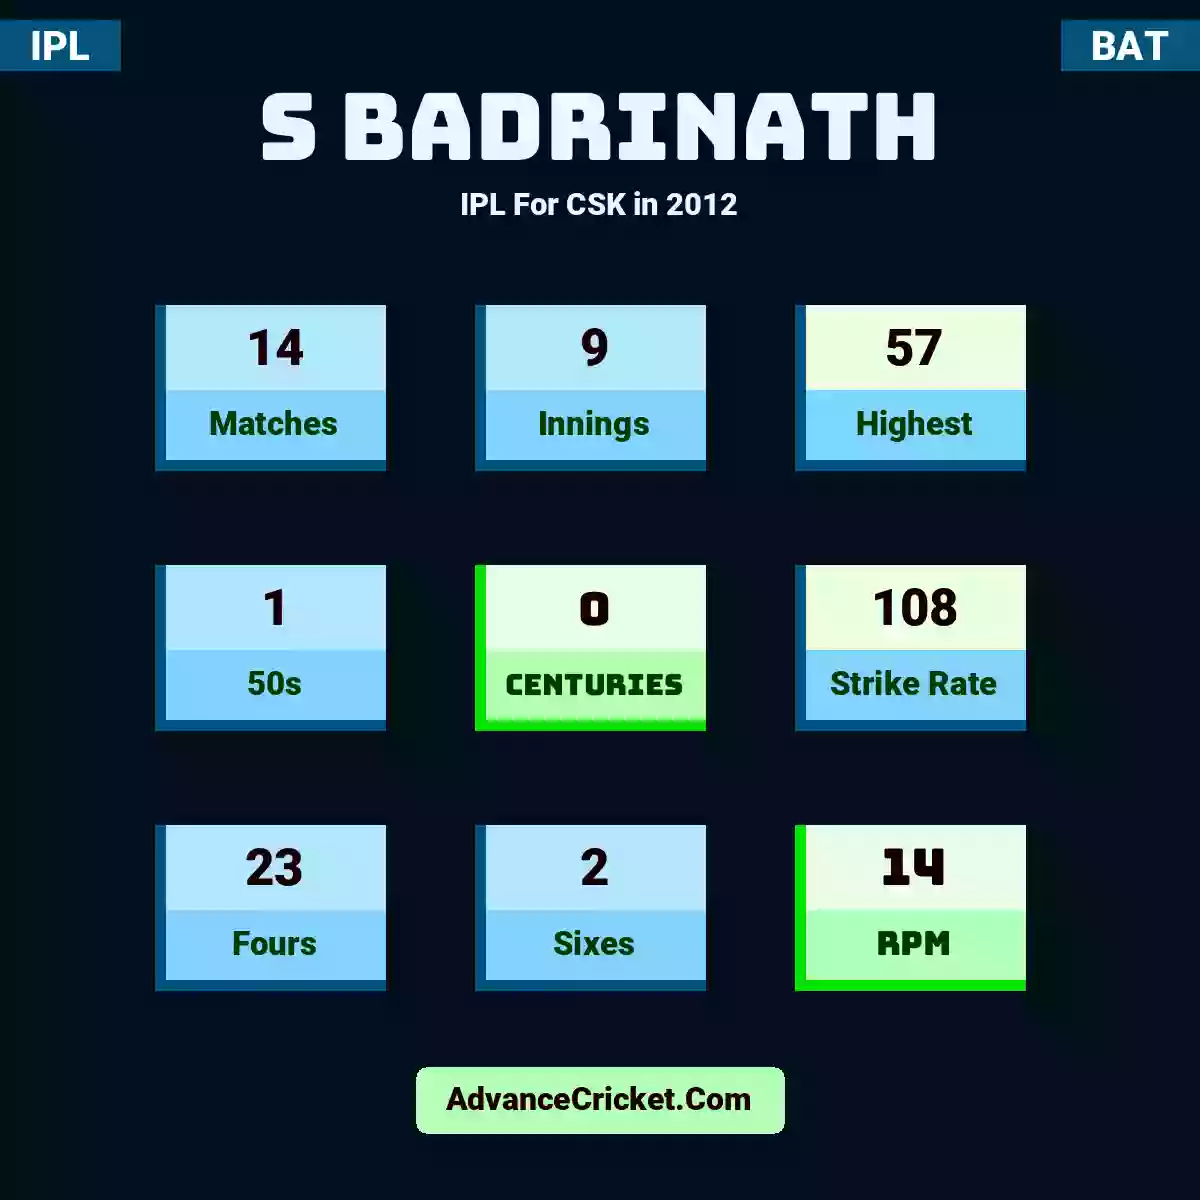 S Badrinath IPL  For CSK in 2012, S Badrinath played 14 matches, scored 57 runs as highest, 1 half-centuries, and 0 centuries, with a strike rate of 108. S.Badrinath hit 23 fours and 2 sixes, with an RPM of 14.